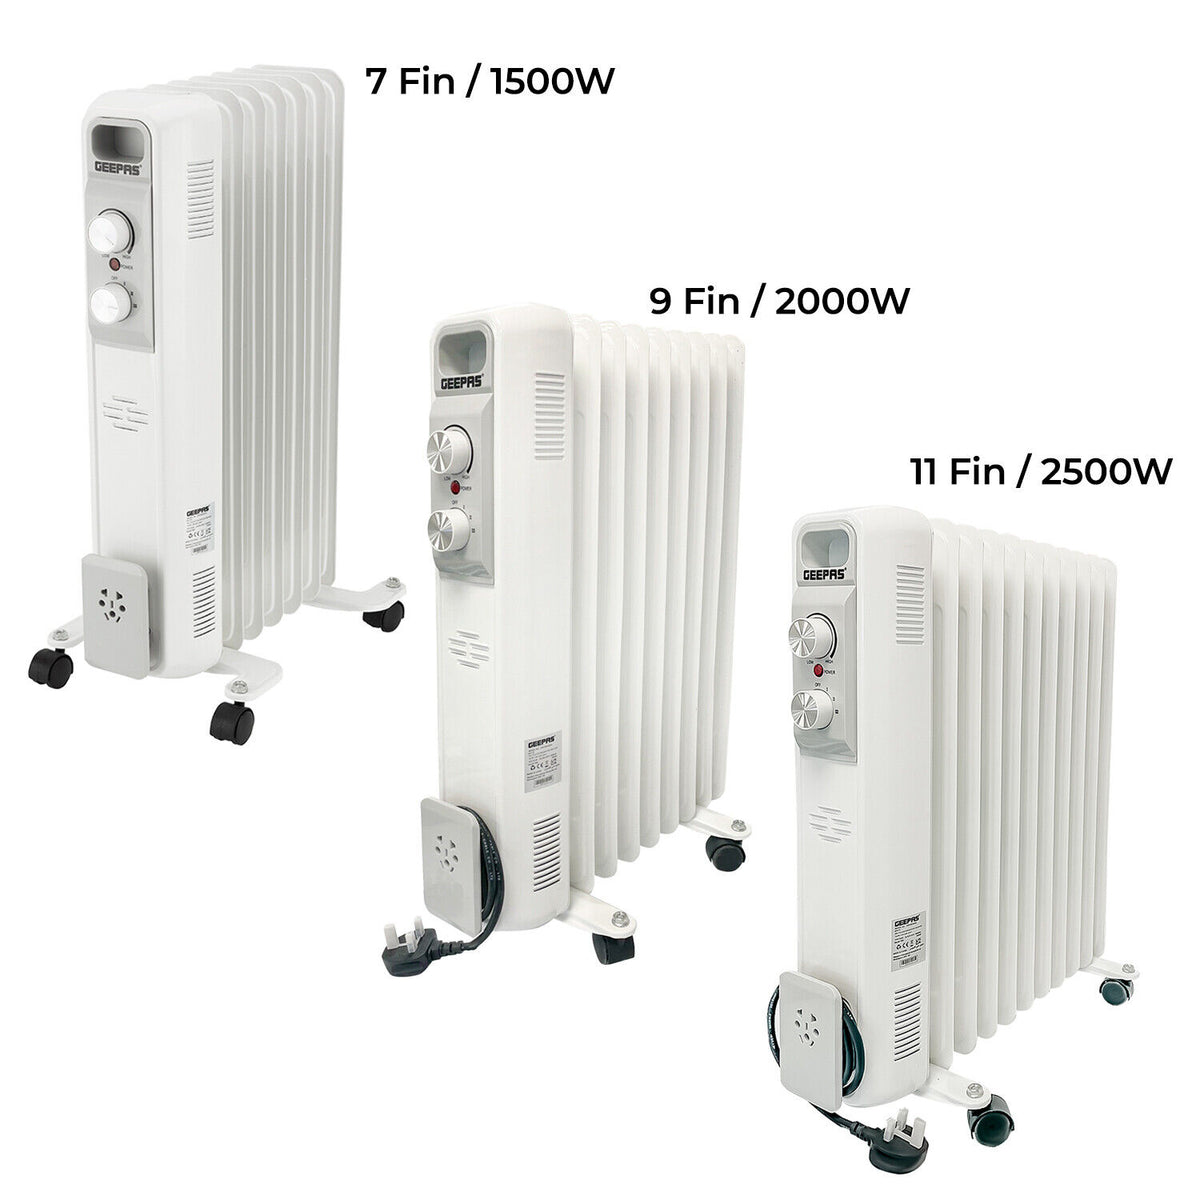 7-Fin, 9-Fin and 11-Fin Oil Filled Electric Portable Radiator